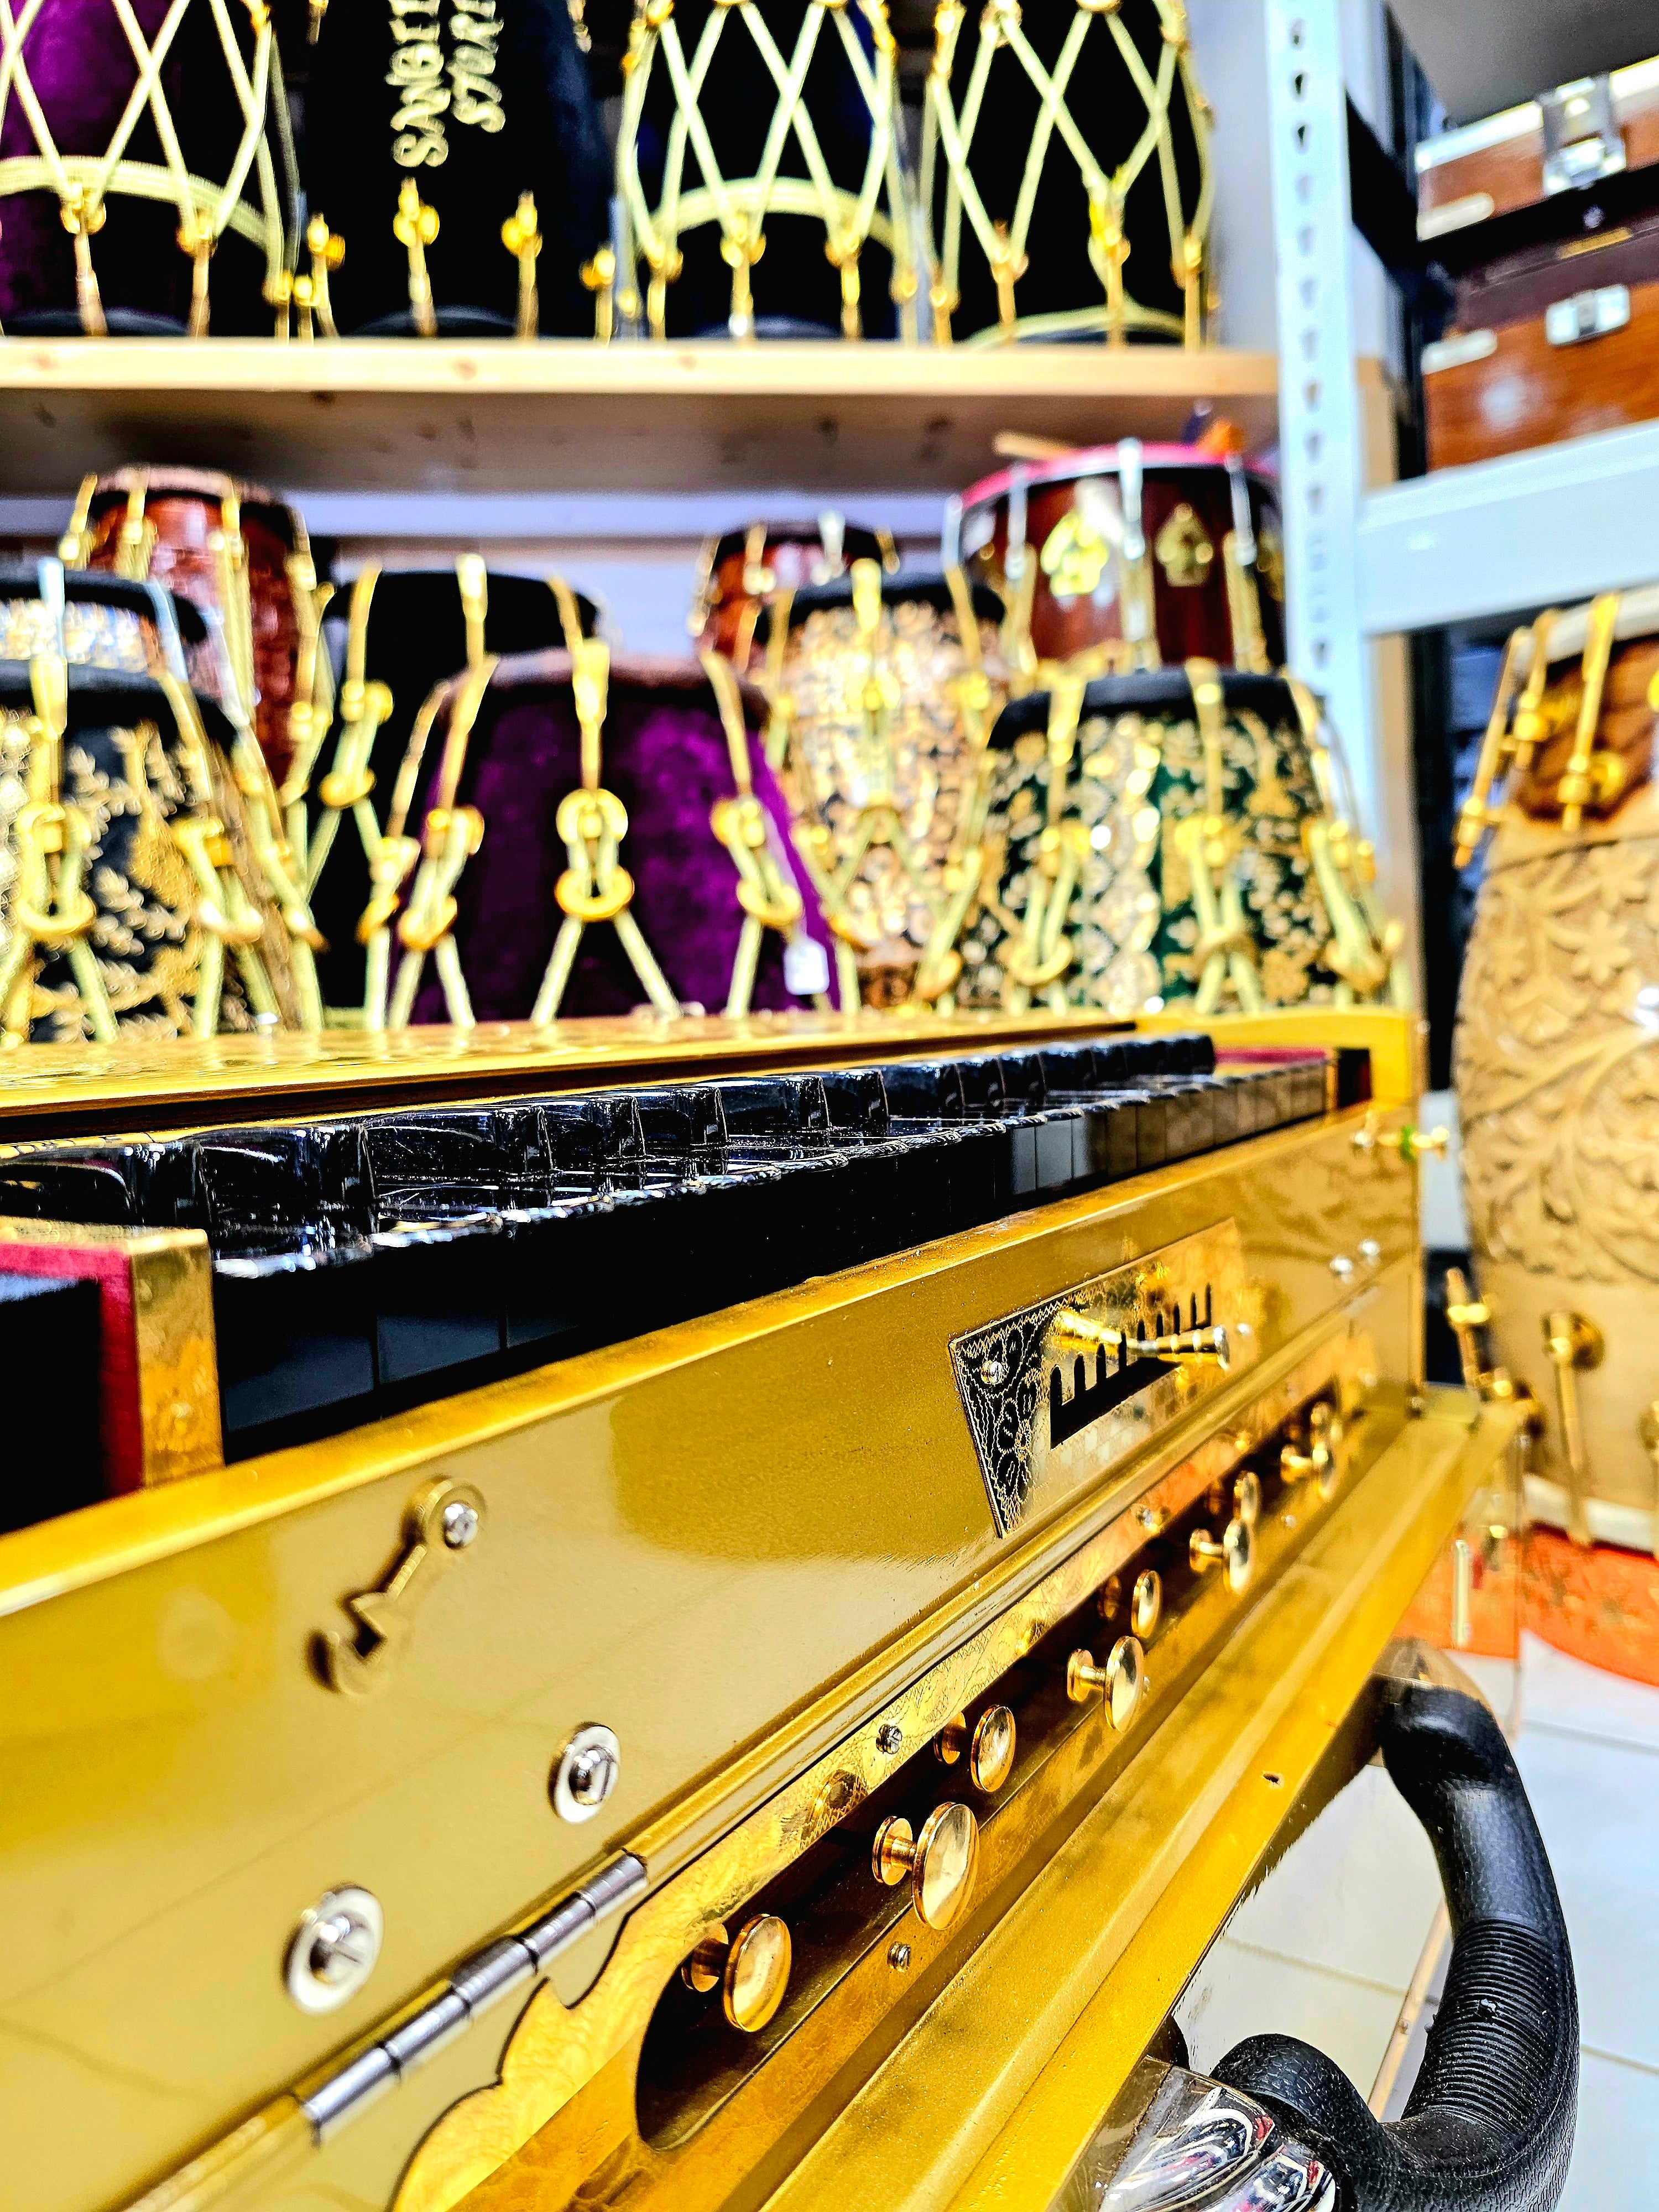 Divine Symphony: Golden Enigma 3 Reed BMF 9 Scale-Changer Sangeet Store Harmonium with Ebony Keys and Opulent Golden Accents